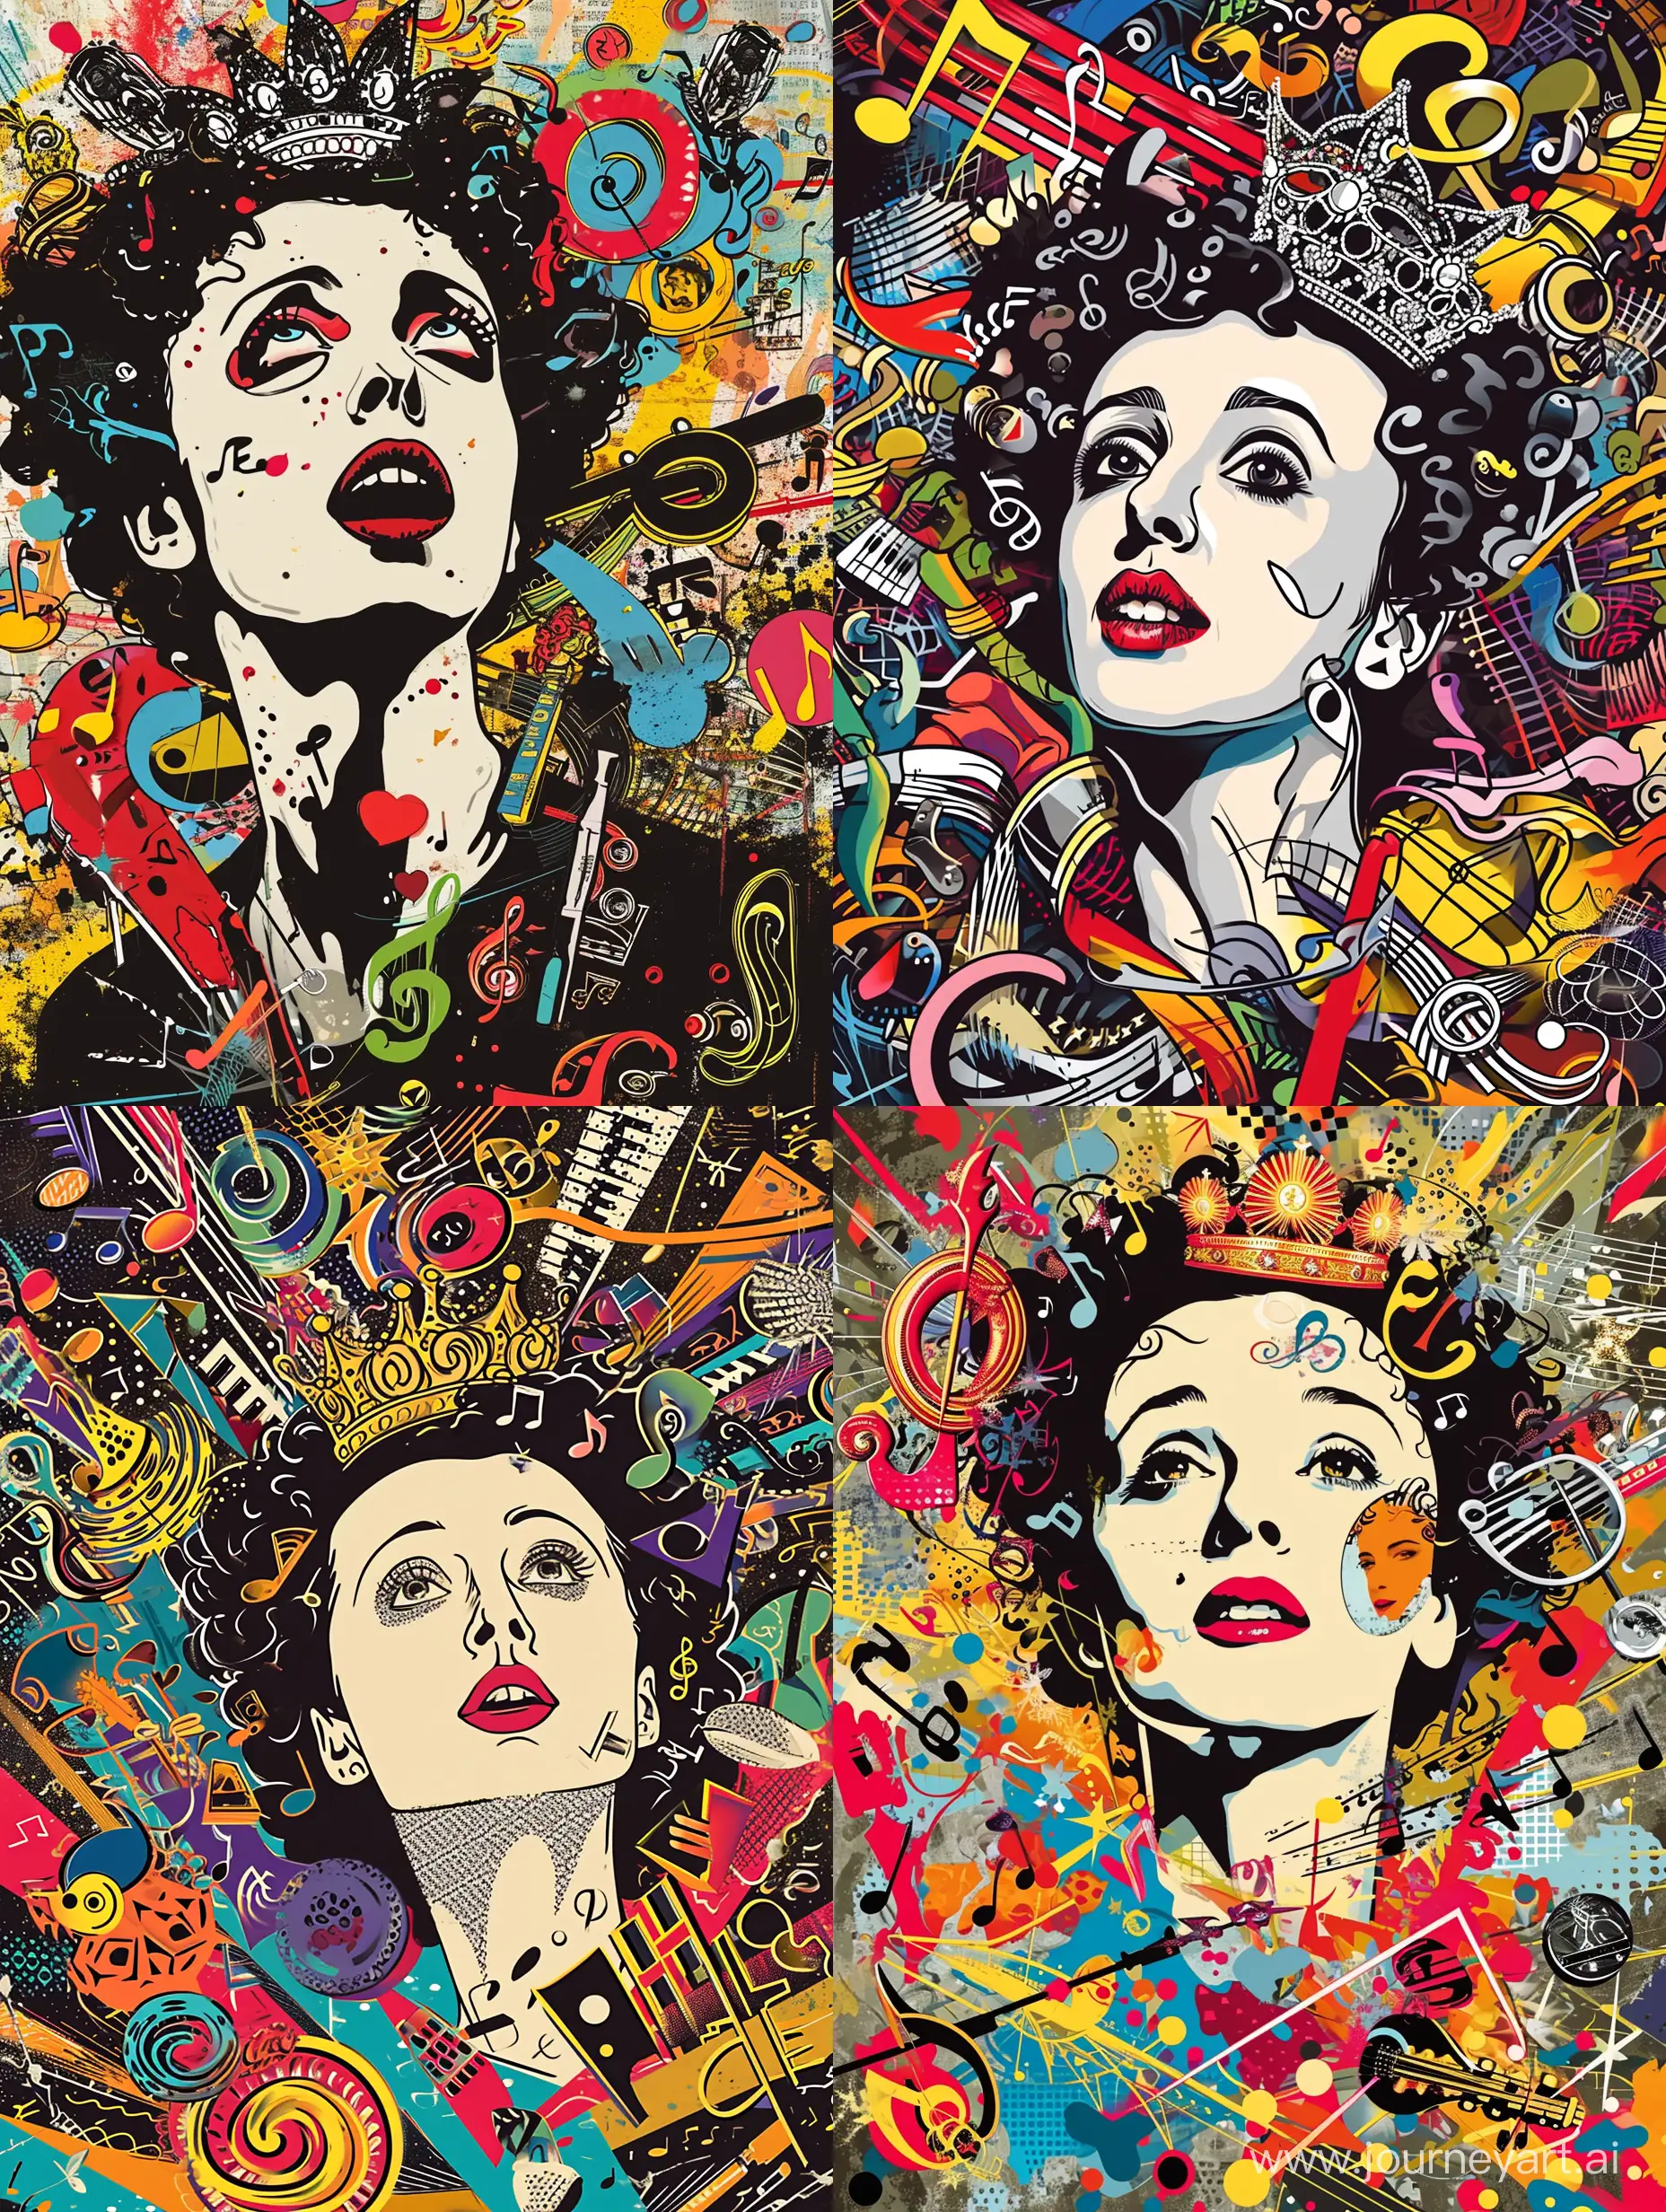 Waist portrait of Edith Piaf, beautiful, with a crown on her head, surrounded by musical symbols, many details, complex colors, caricature, pop art style